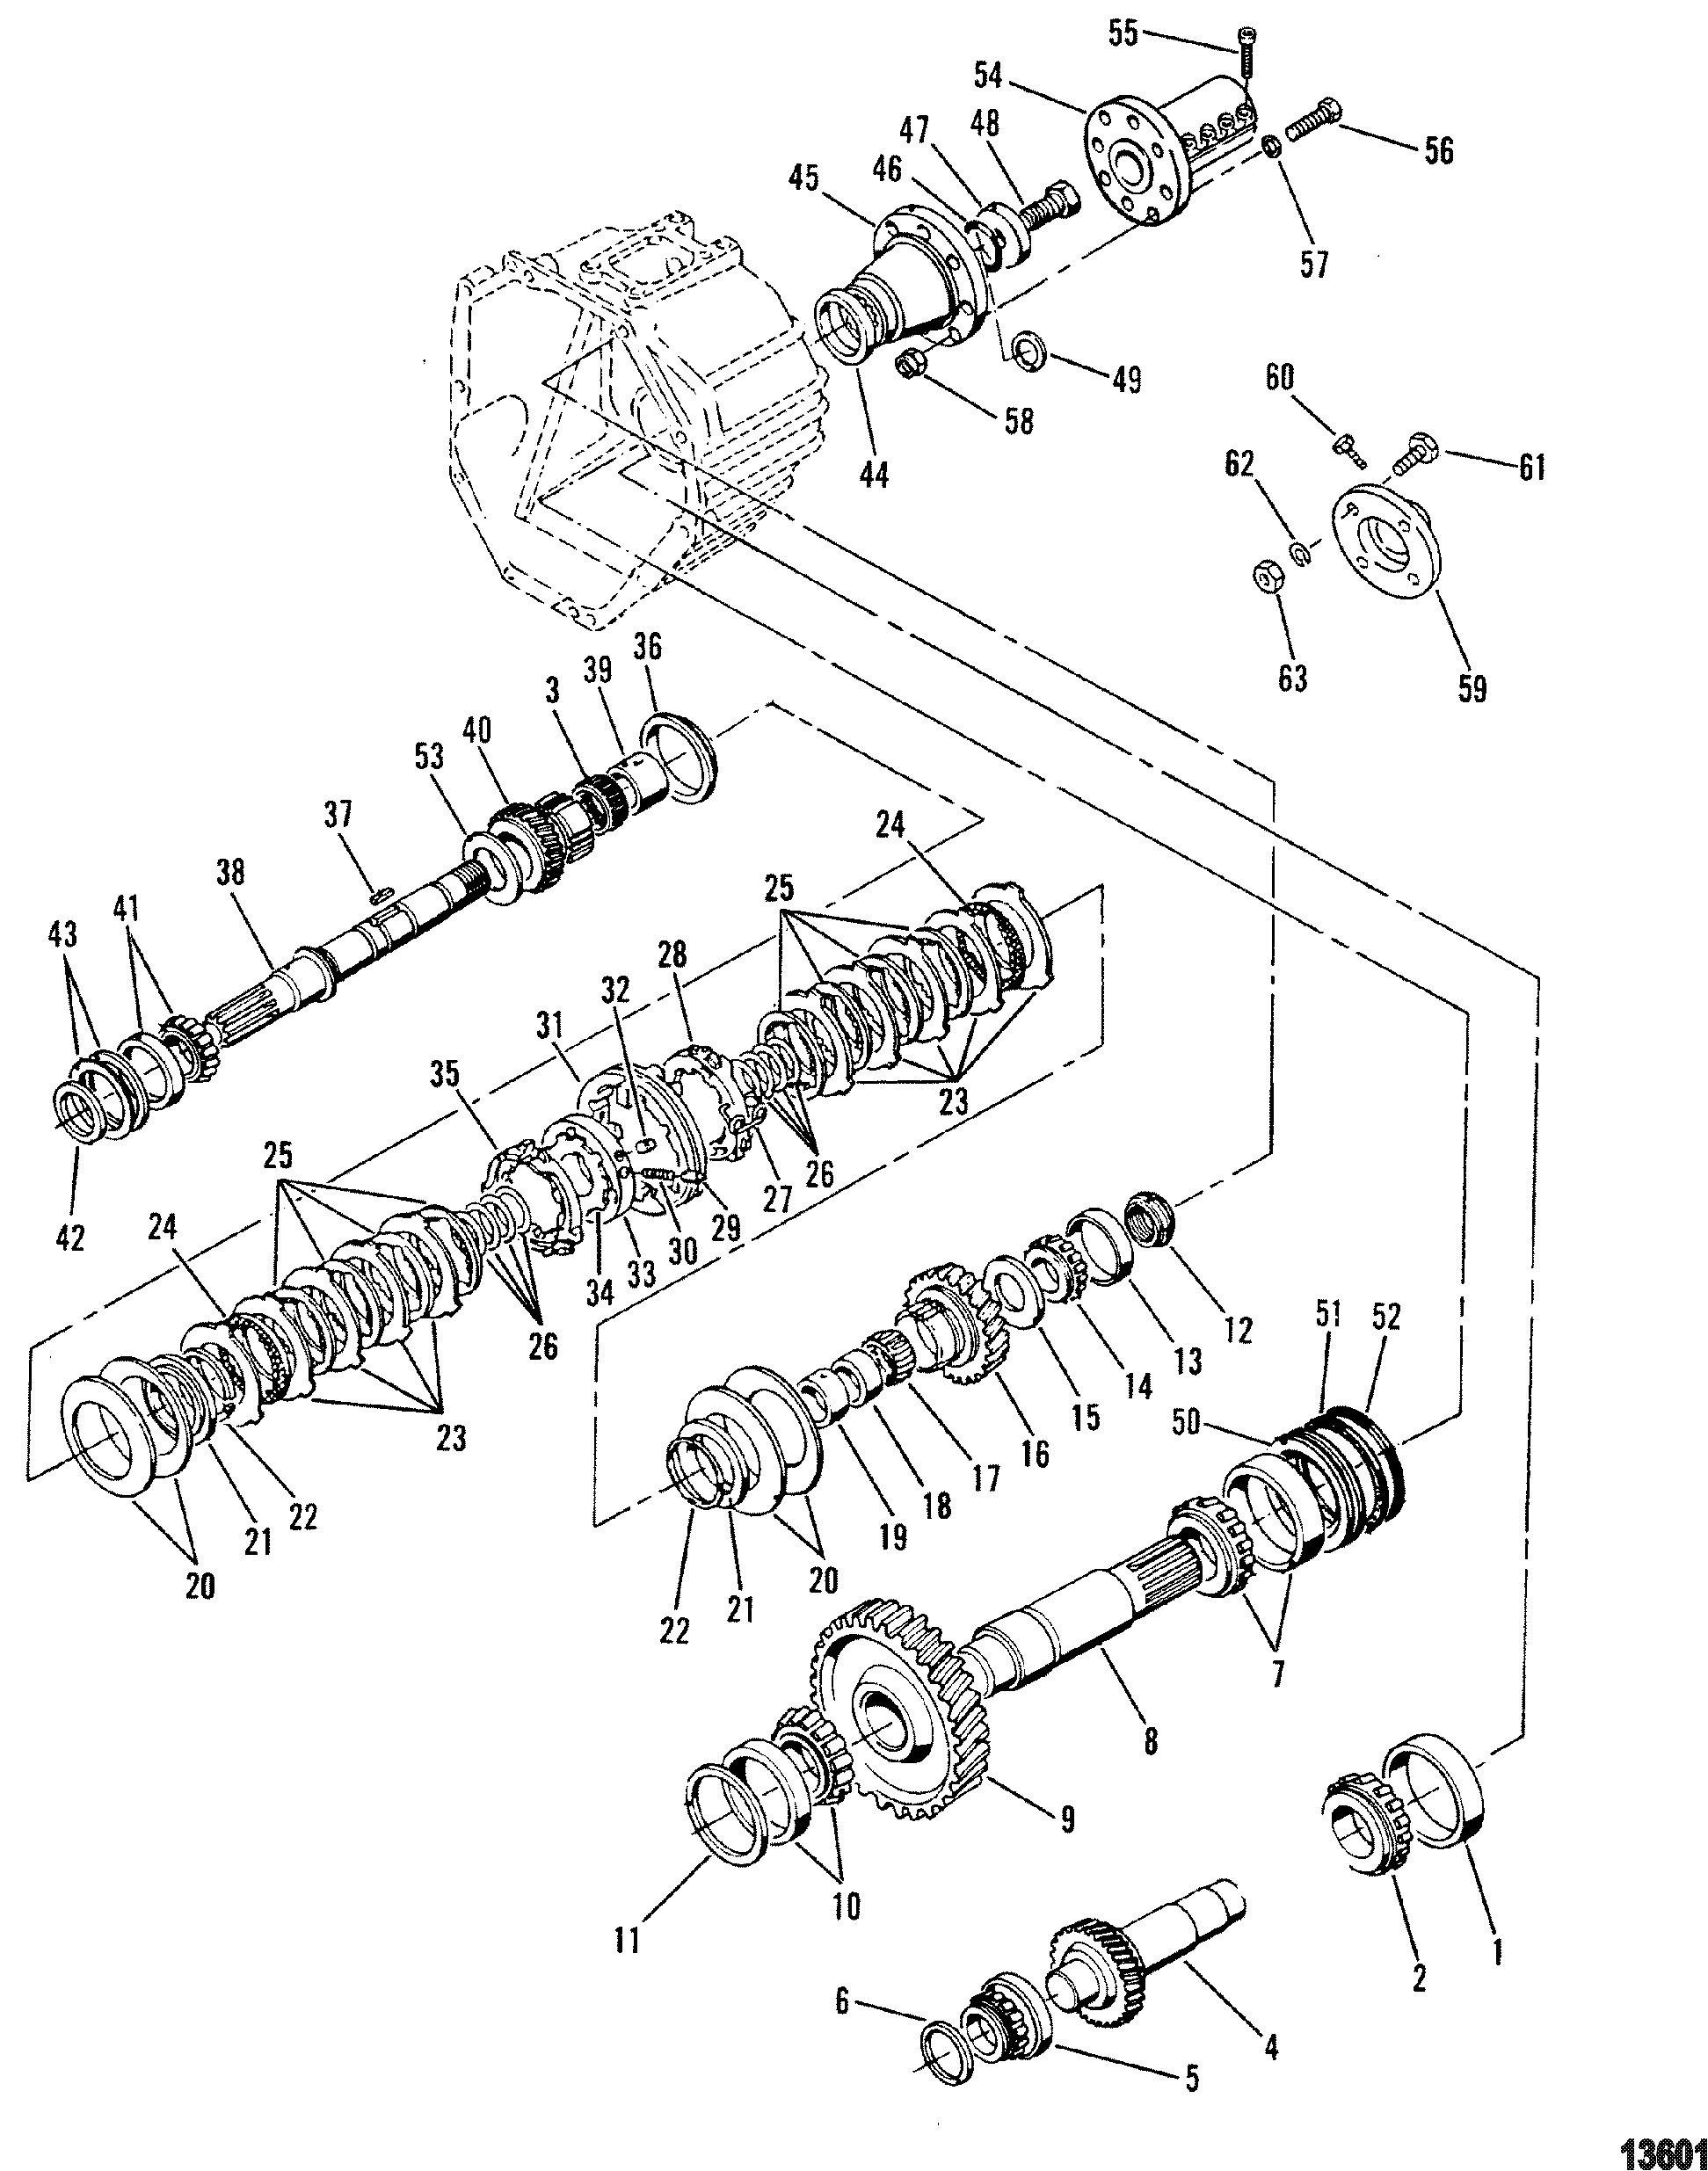 Transmission(8 Degree Down) (Internal Component) Continued